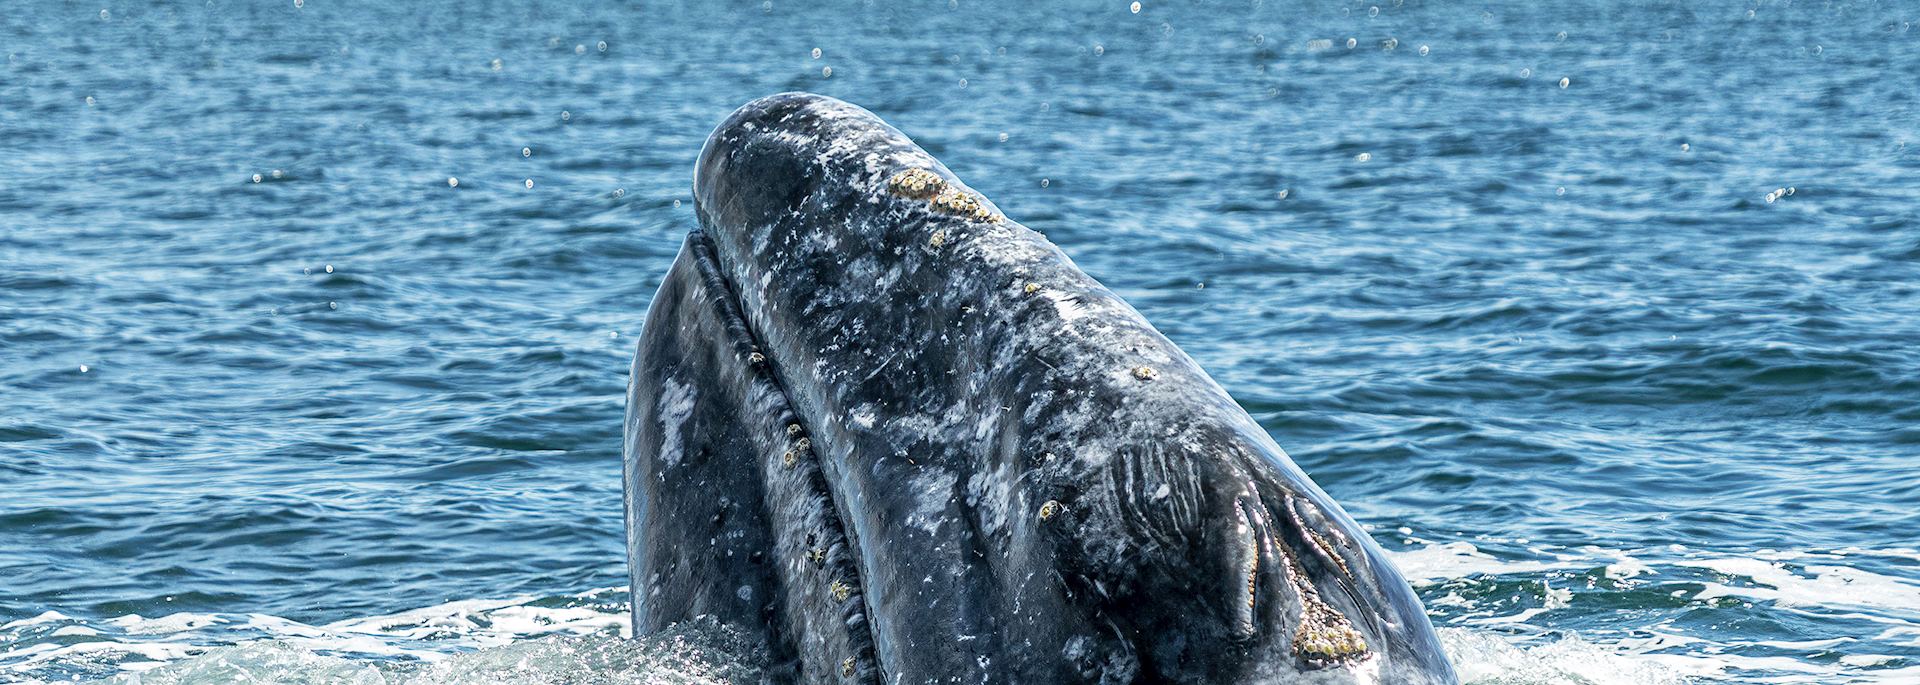 Grey whale in Magdalena Bay